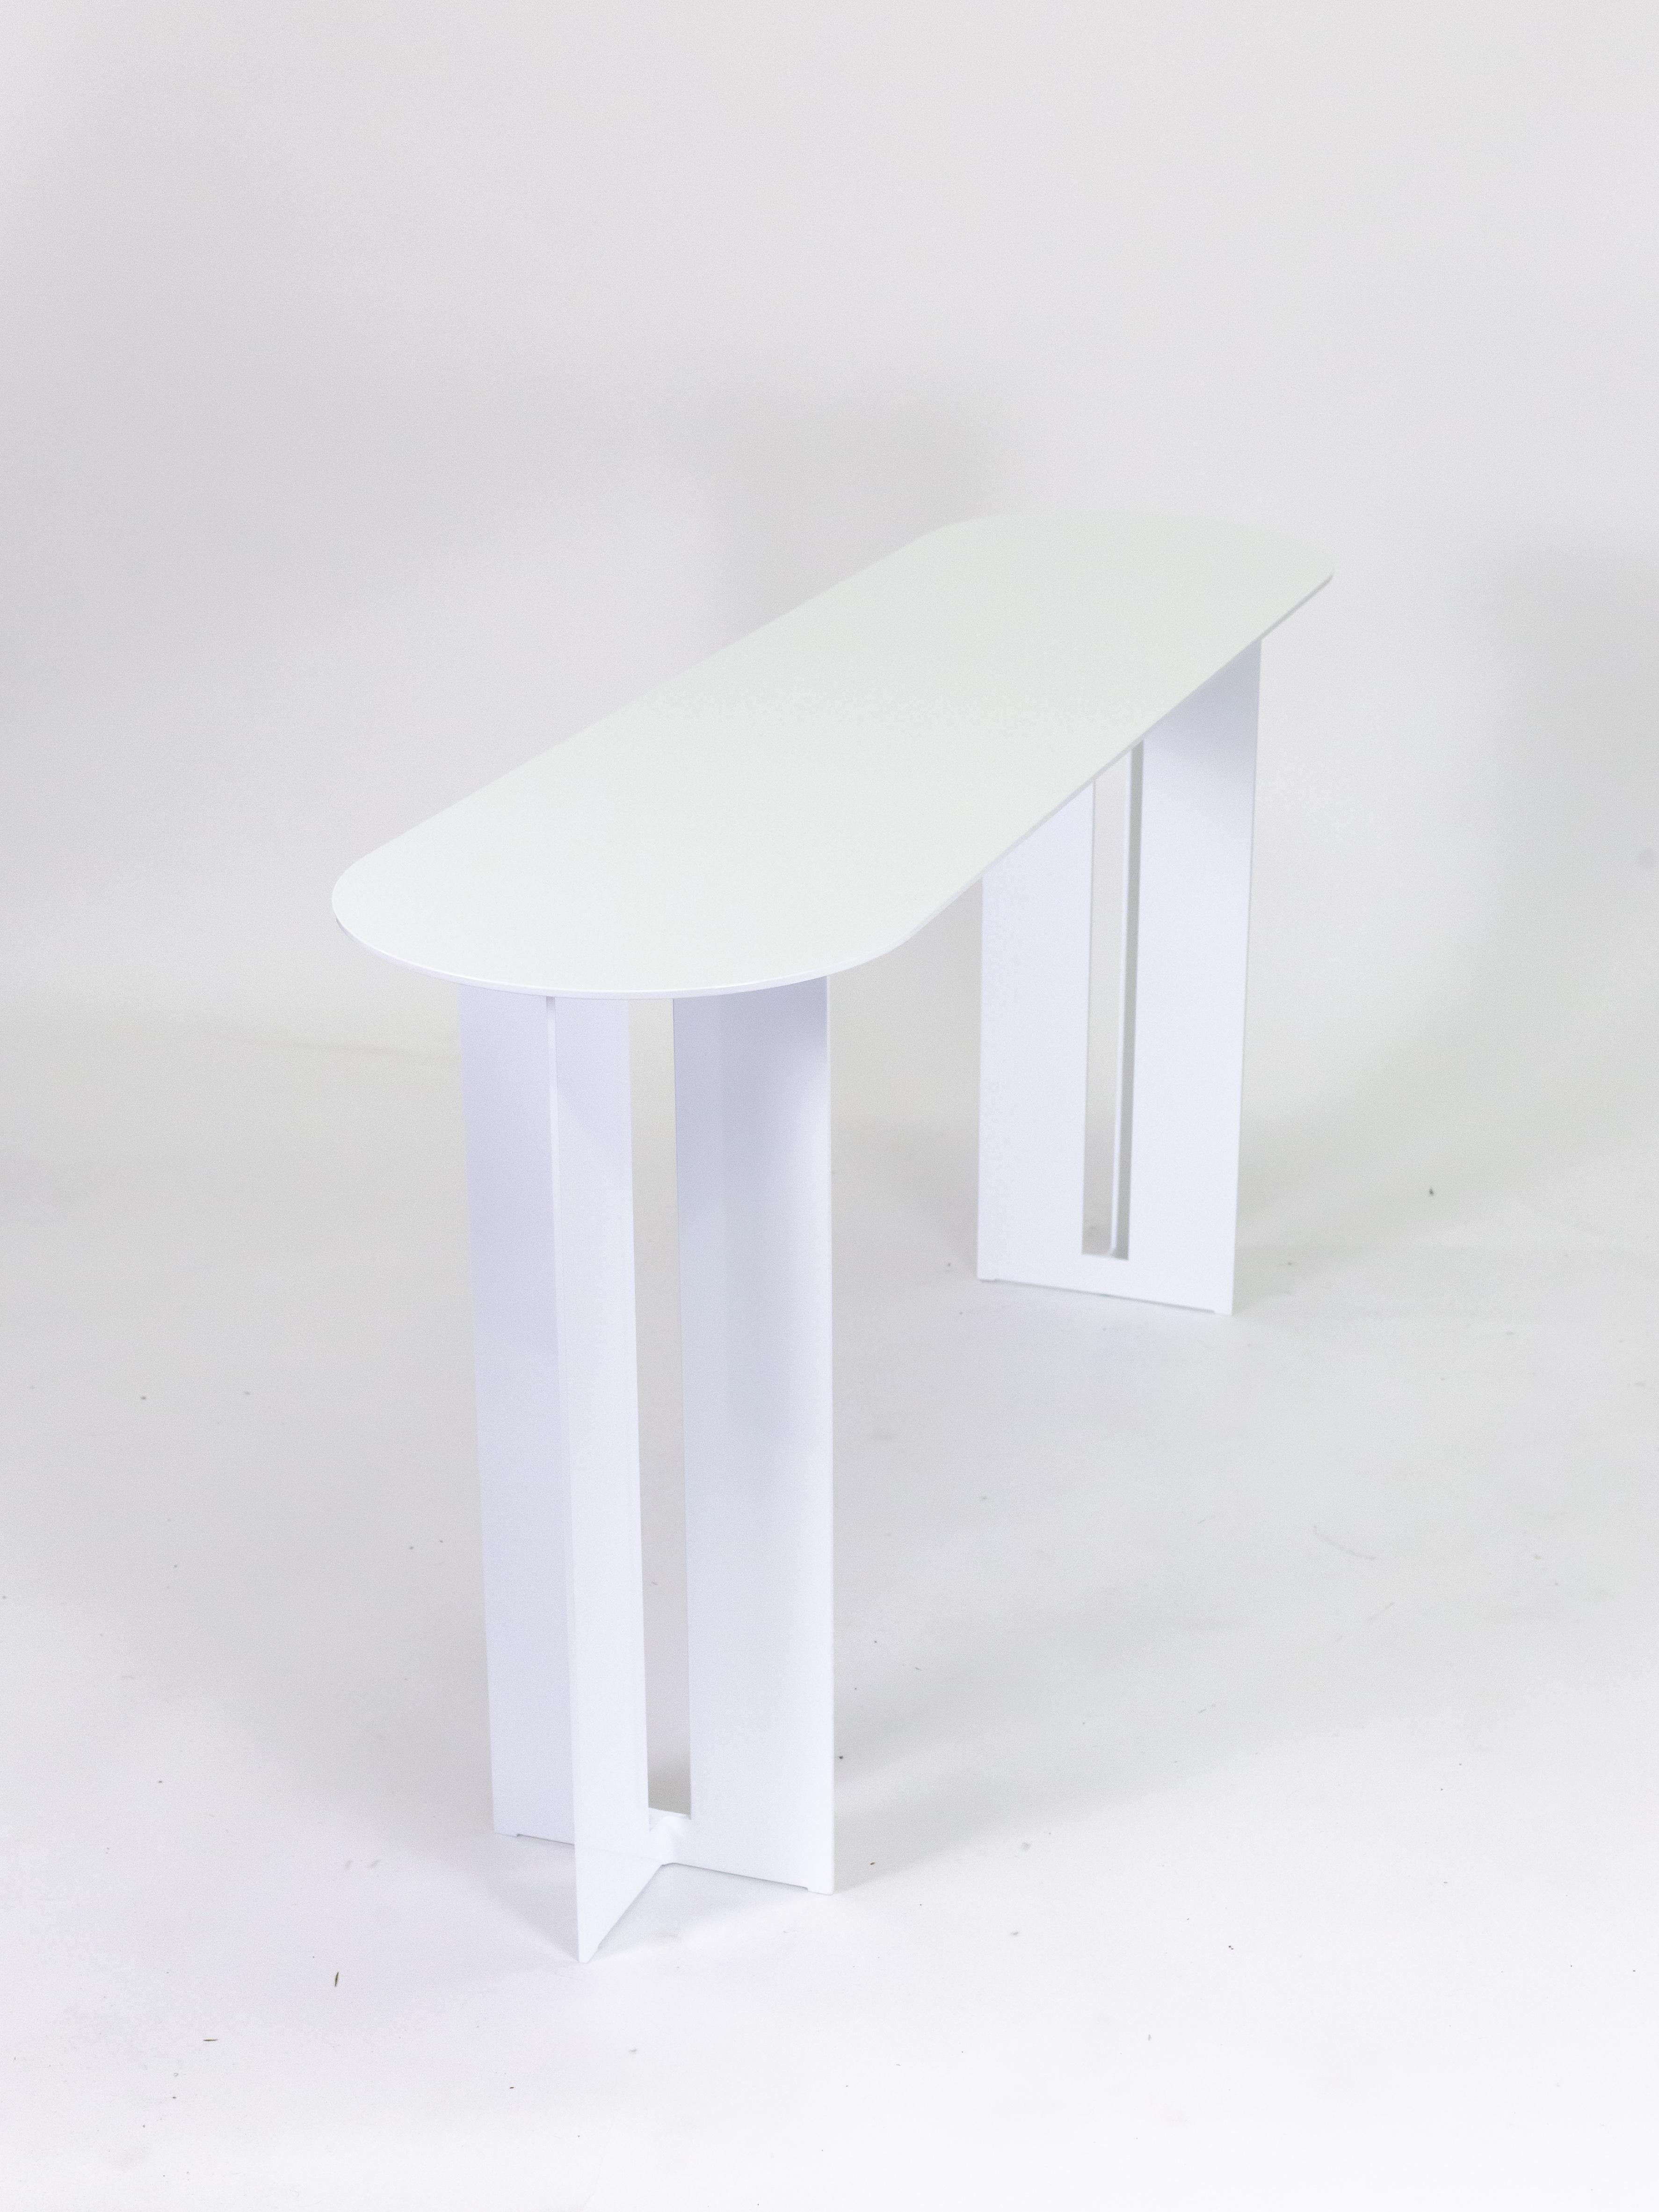 The Mers Console Table is fabricated from solid aluminum and is suitable for use indoors and out. Form is inspired by the simple utilitarianism of West Coast aluminum fishing boats.

Shown in aluminum with White painted finish.
Custom sizing and